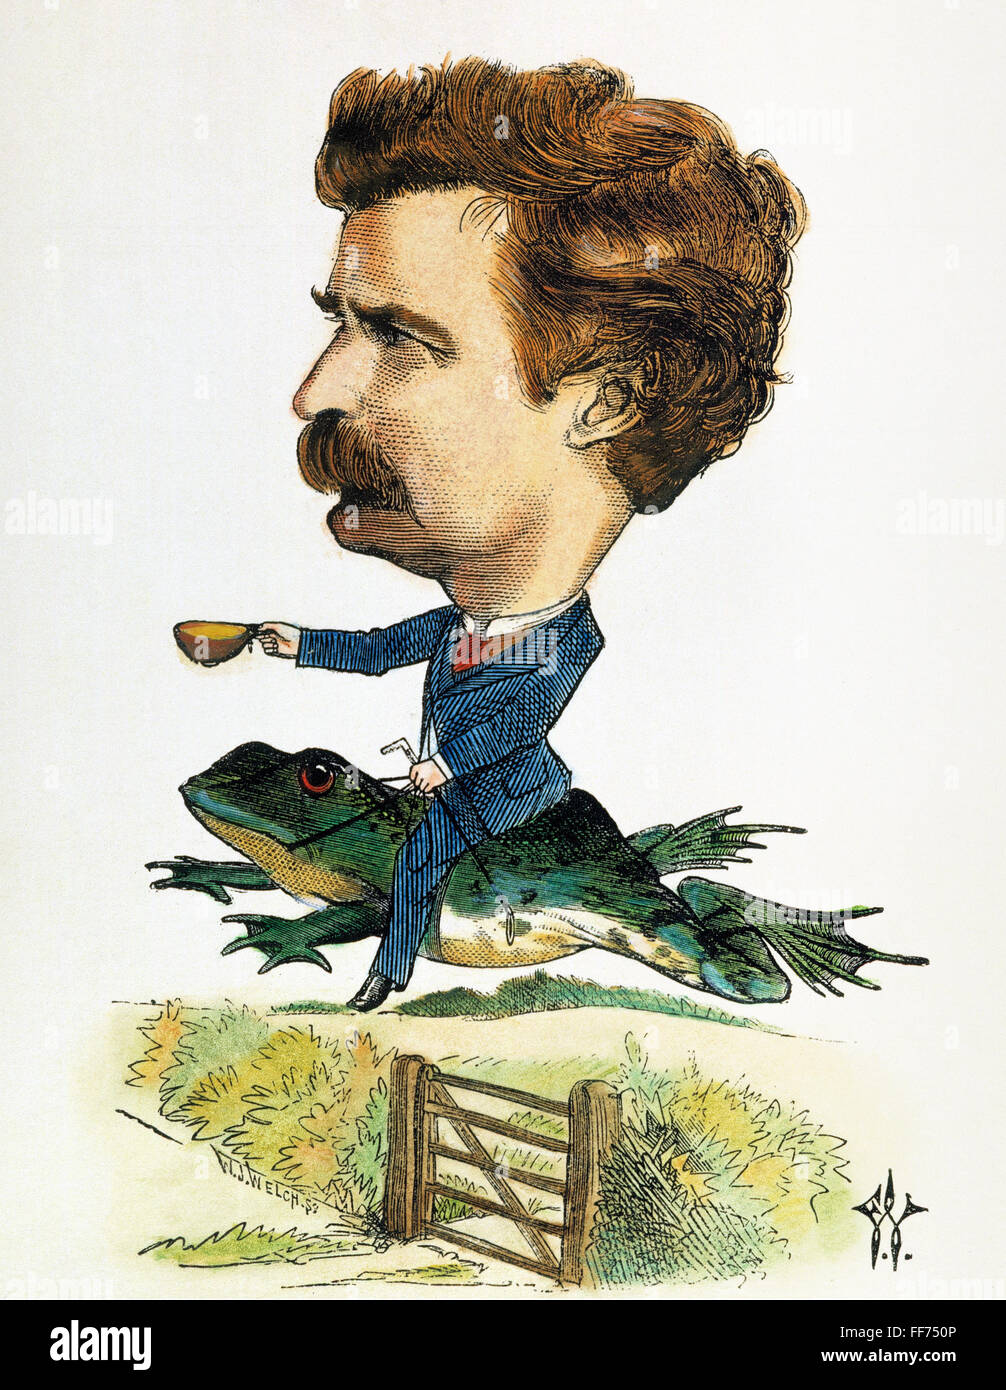 SAMUEL LANGHORNE CLEMENS /n(1835-1910). Pseudonym Mark Twain. American writer and humorist. Riding the celebrated jumping frog. Colored caricature, 1872, by Frederick Waddy. Stock Photo